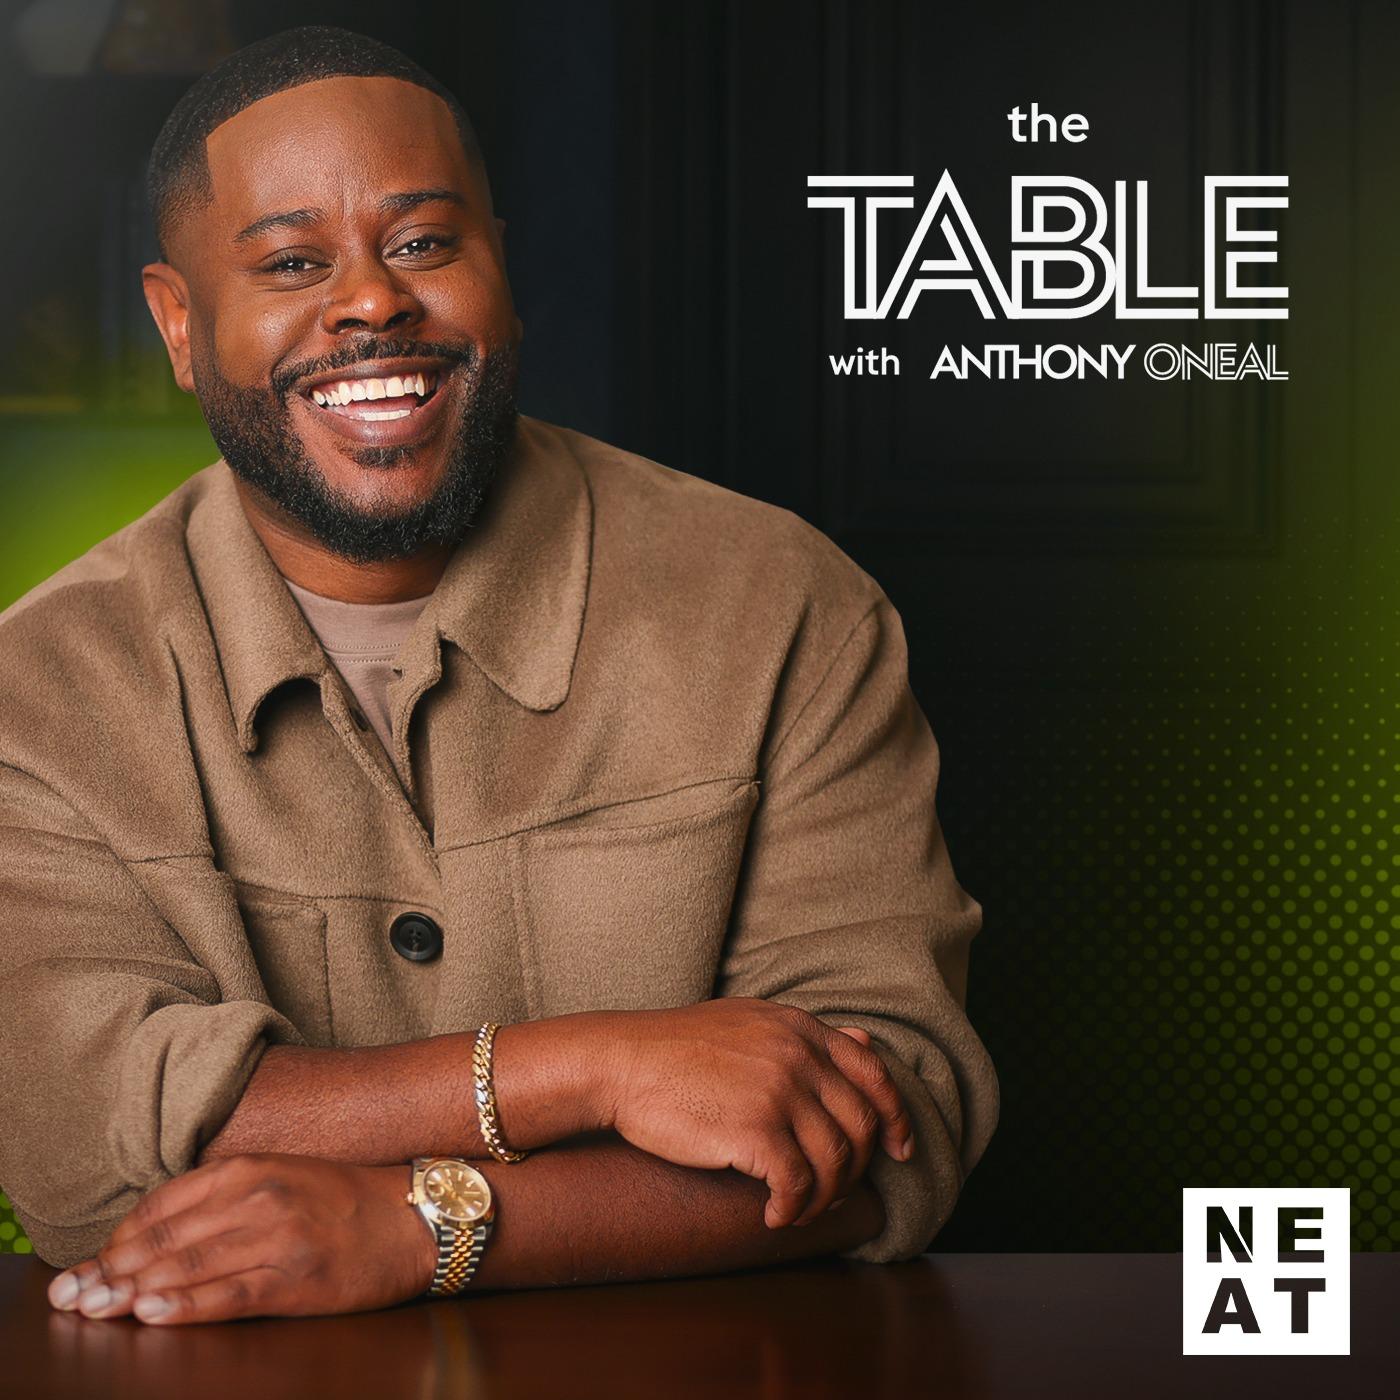 The Table with Anthony ONeal